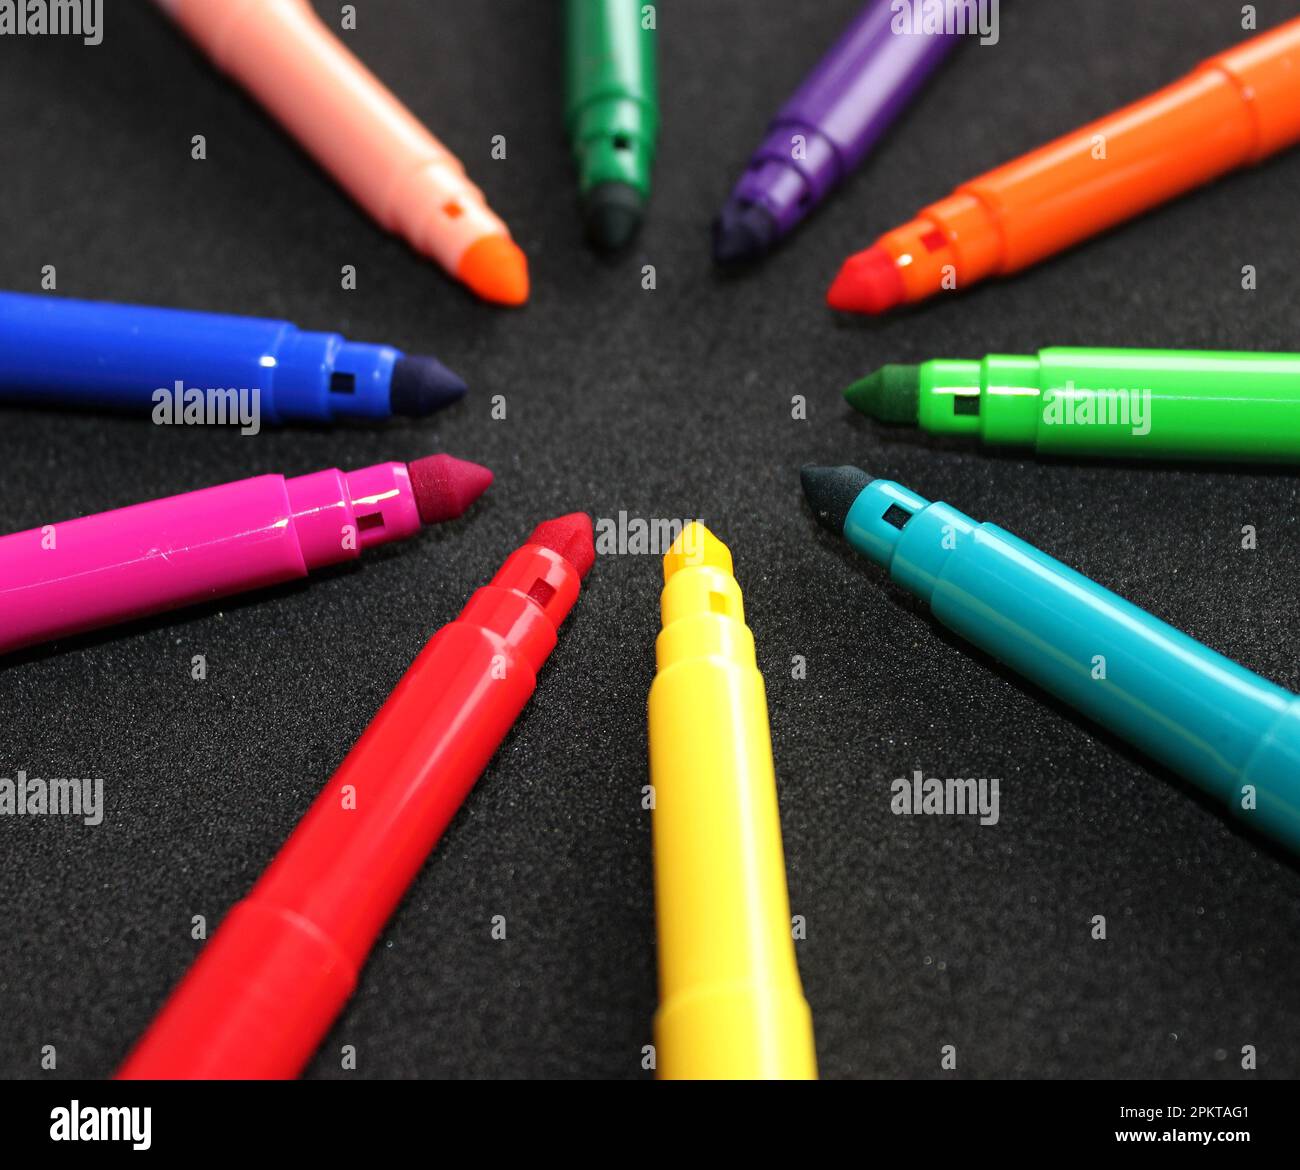 Colorful Felt Tipped Pens Without Pen Caps Like A Rays On A Black Surface Stock Photo Stock Photo